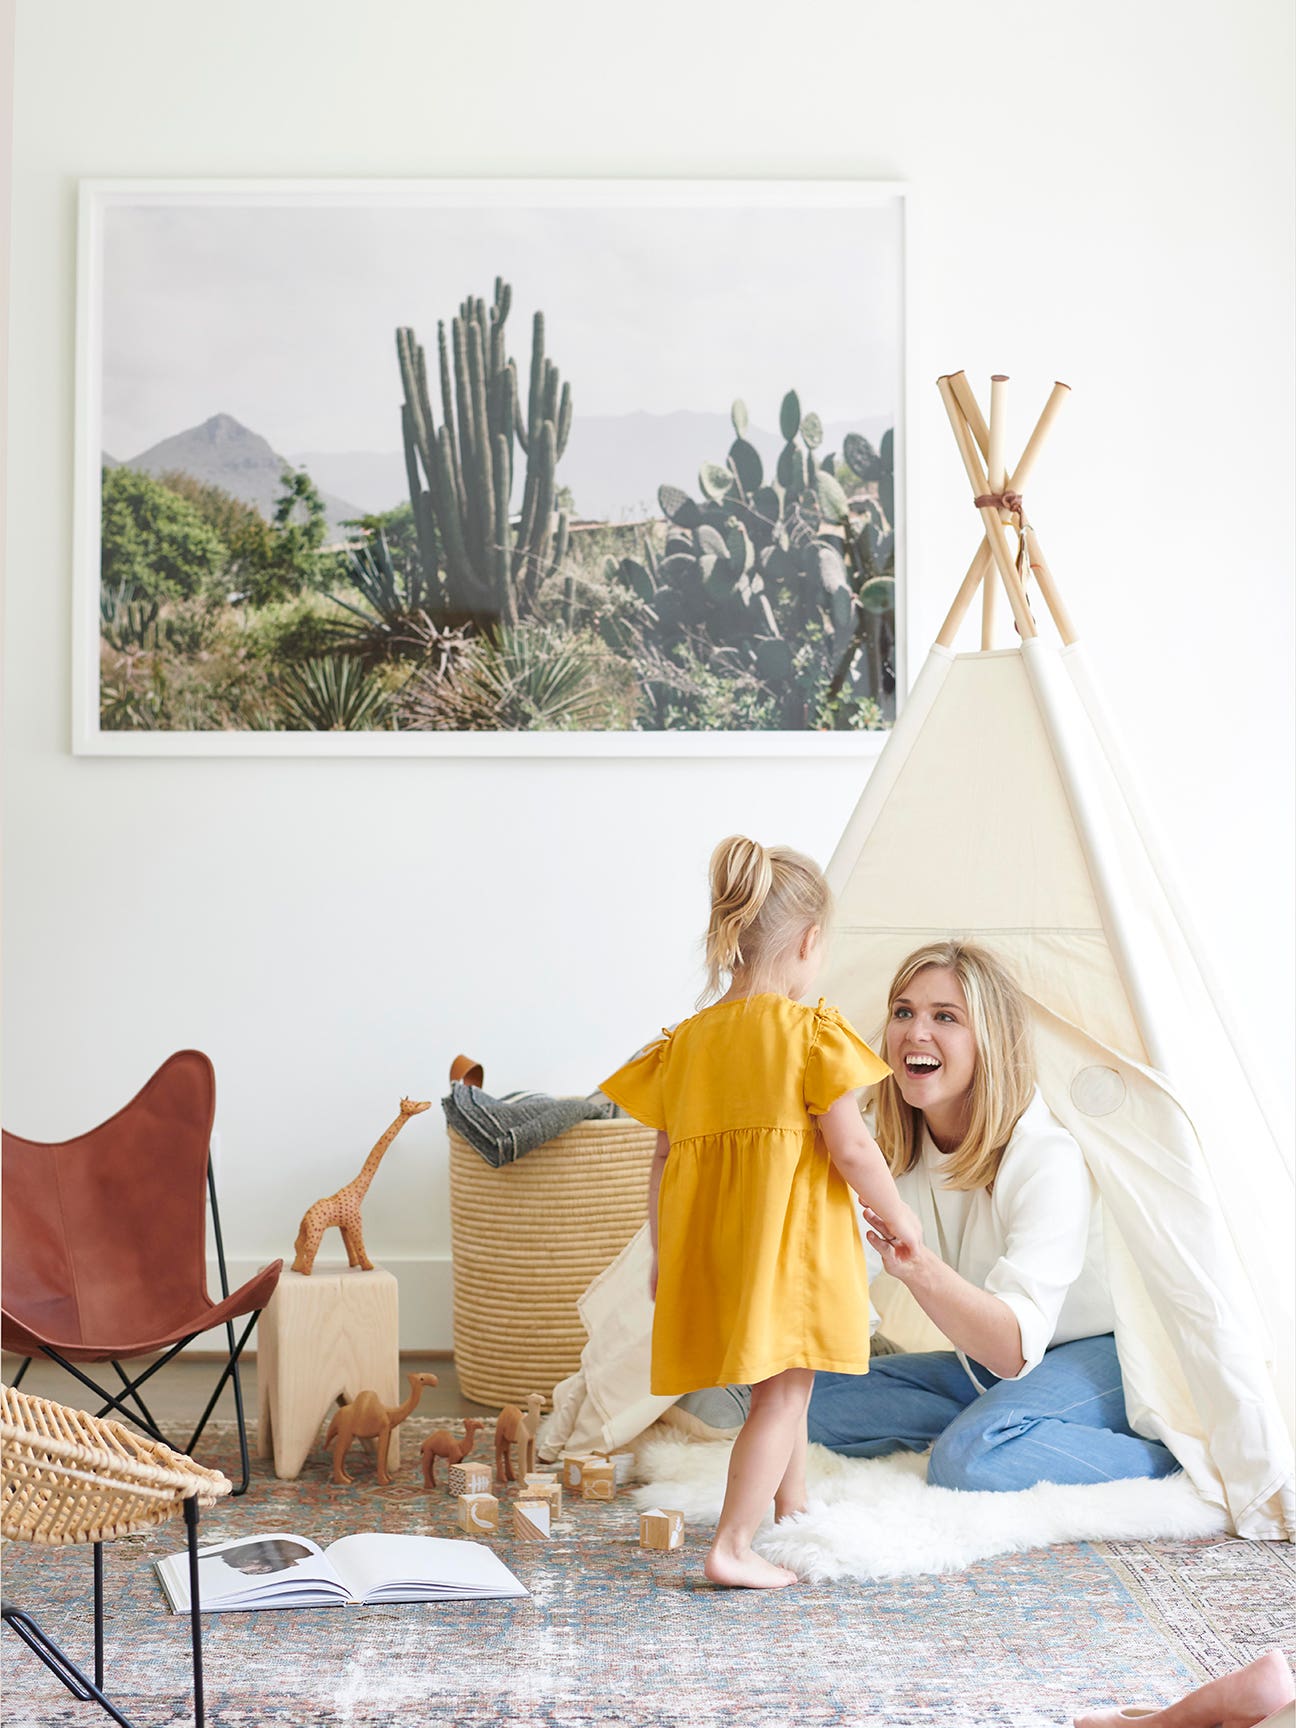 carly nance sitting in a tepee looking at her daughter